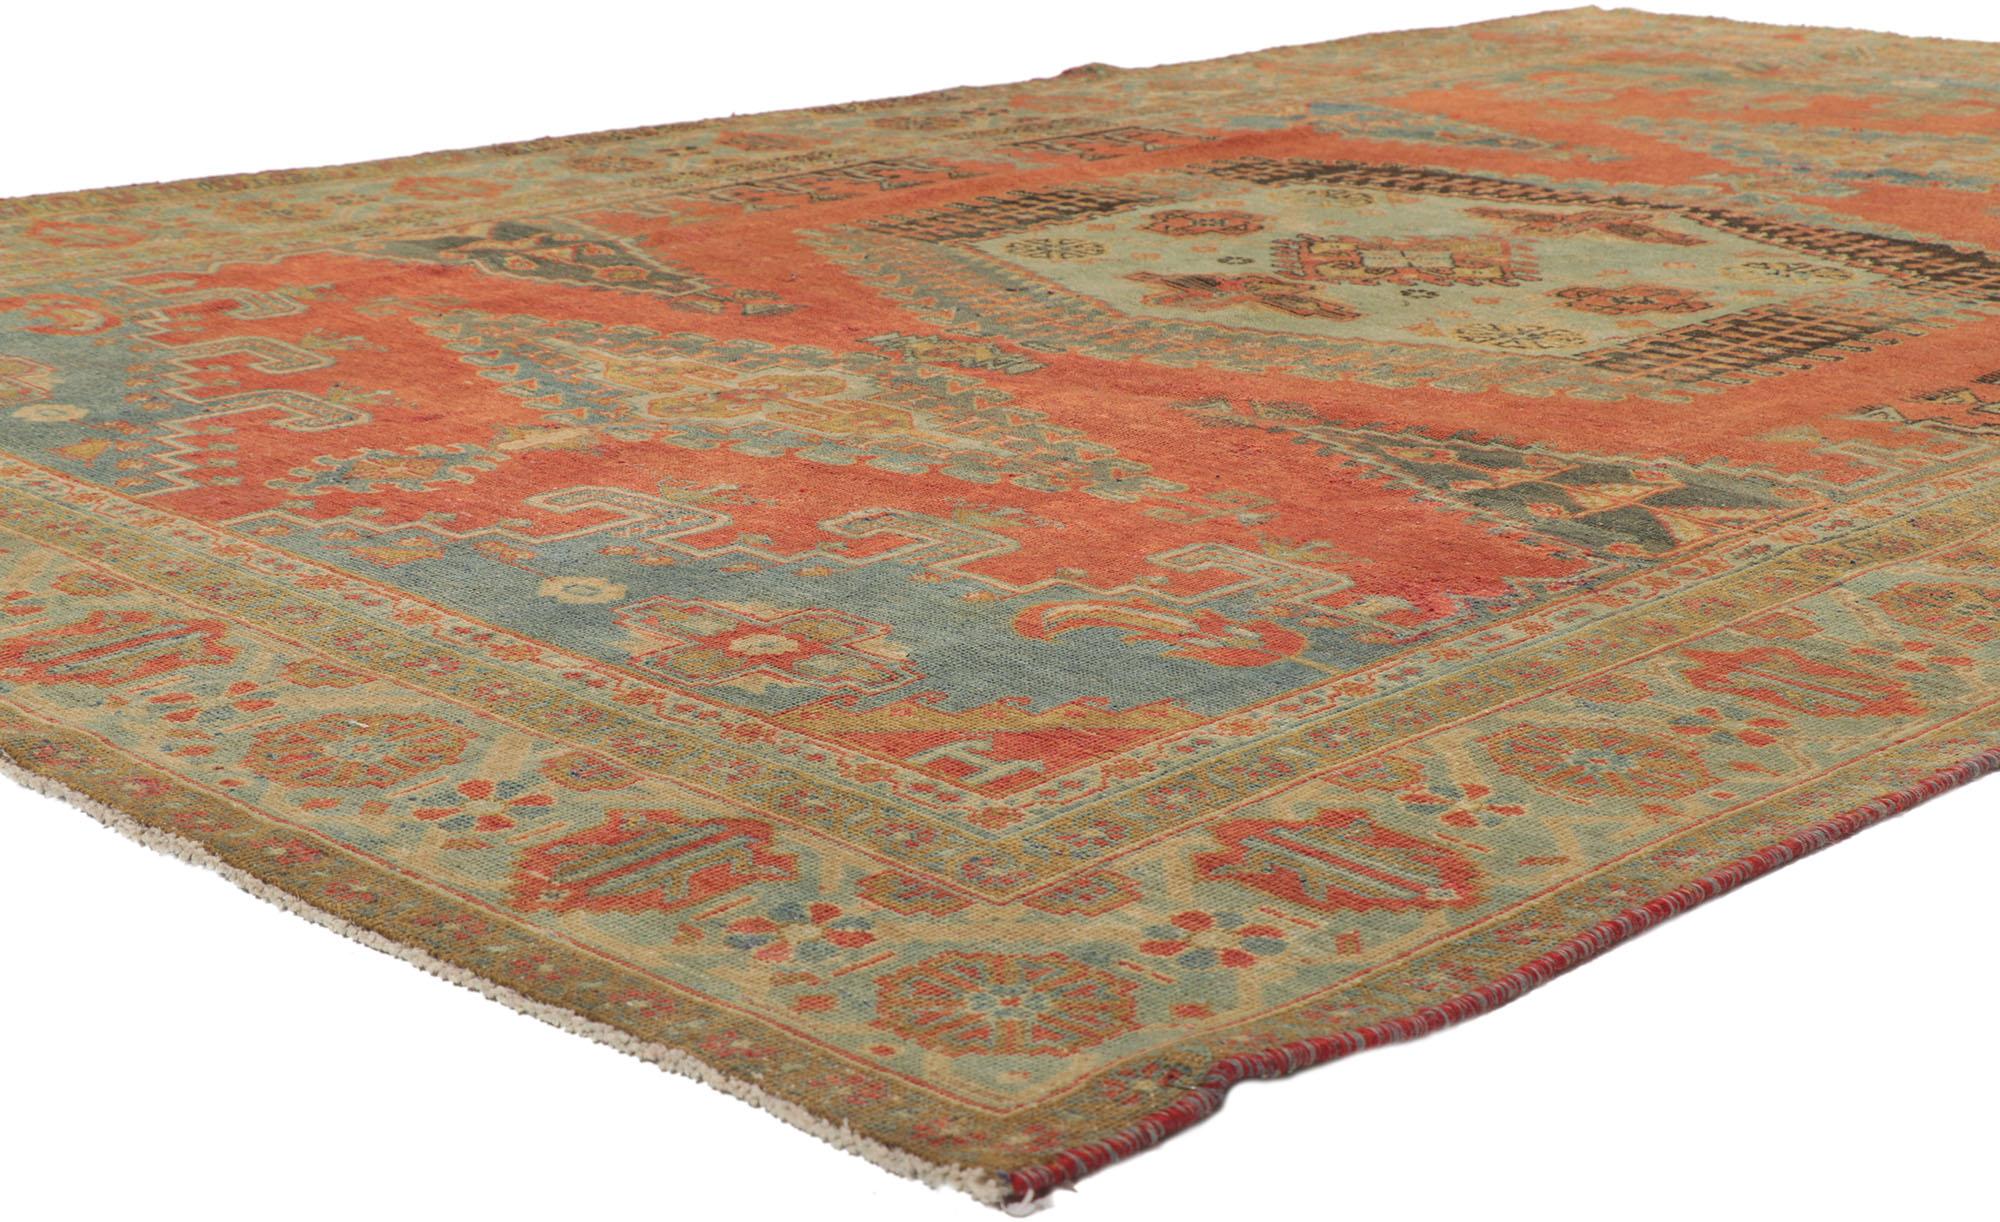 ​53737 Vintage Persian Viss Rug, 07'06 x 10'11.
Tribal enchantment meets rustic finesse in this hand knotted wool vintage Persian Viss rug. Taking center stage on the abrashed and lovingly time-worn red field is a hooked hexagonal medallion anchored